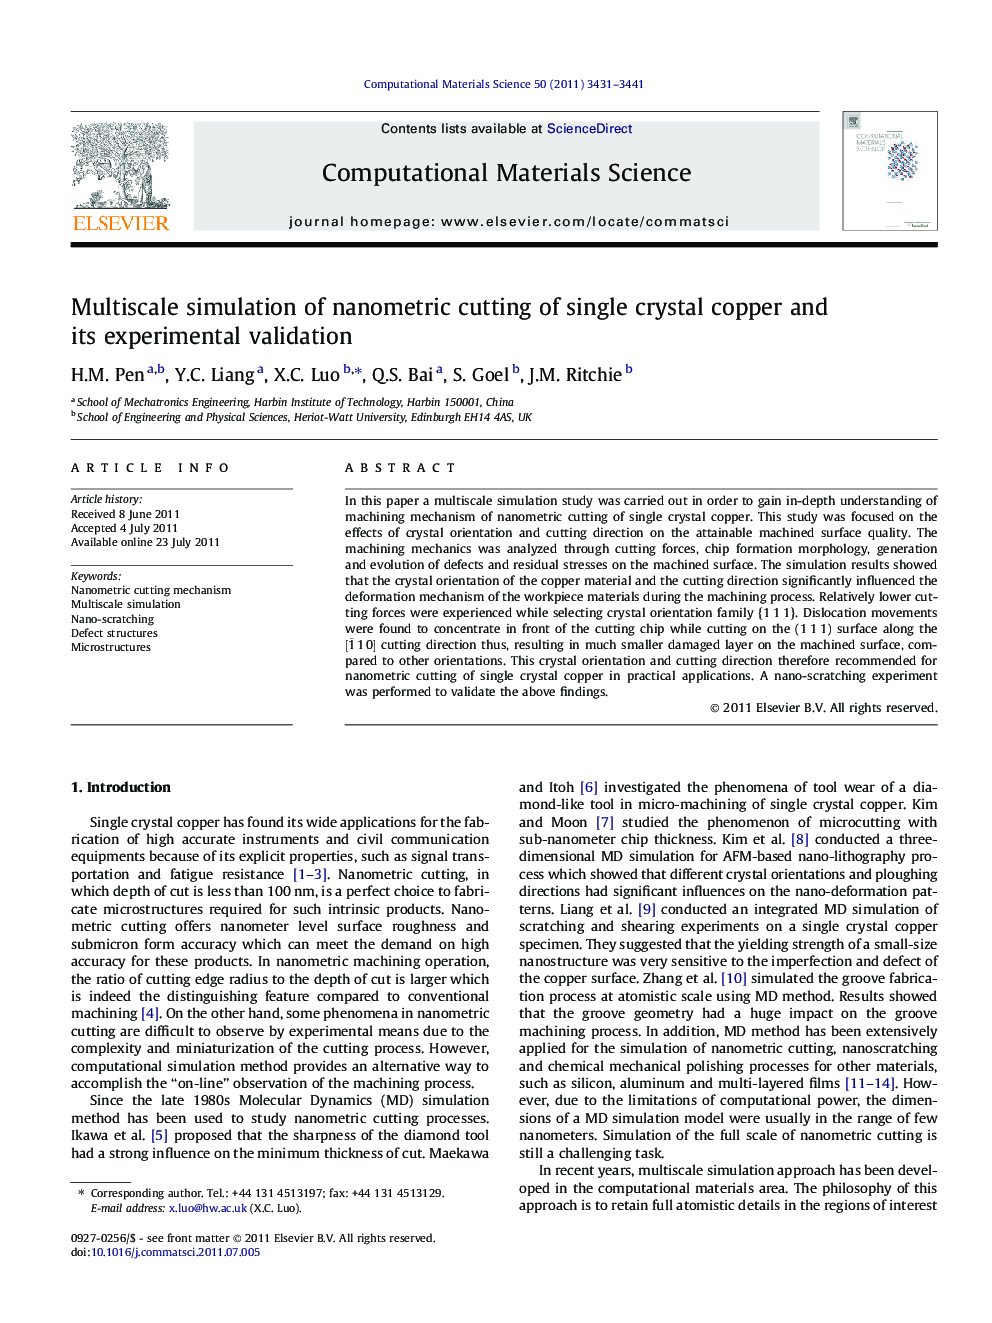 Multiscale simulation of nanometric cutting of single crystal copper and its experimental validation